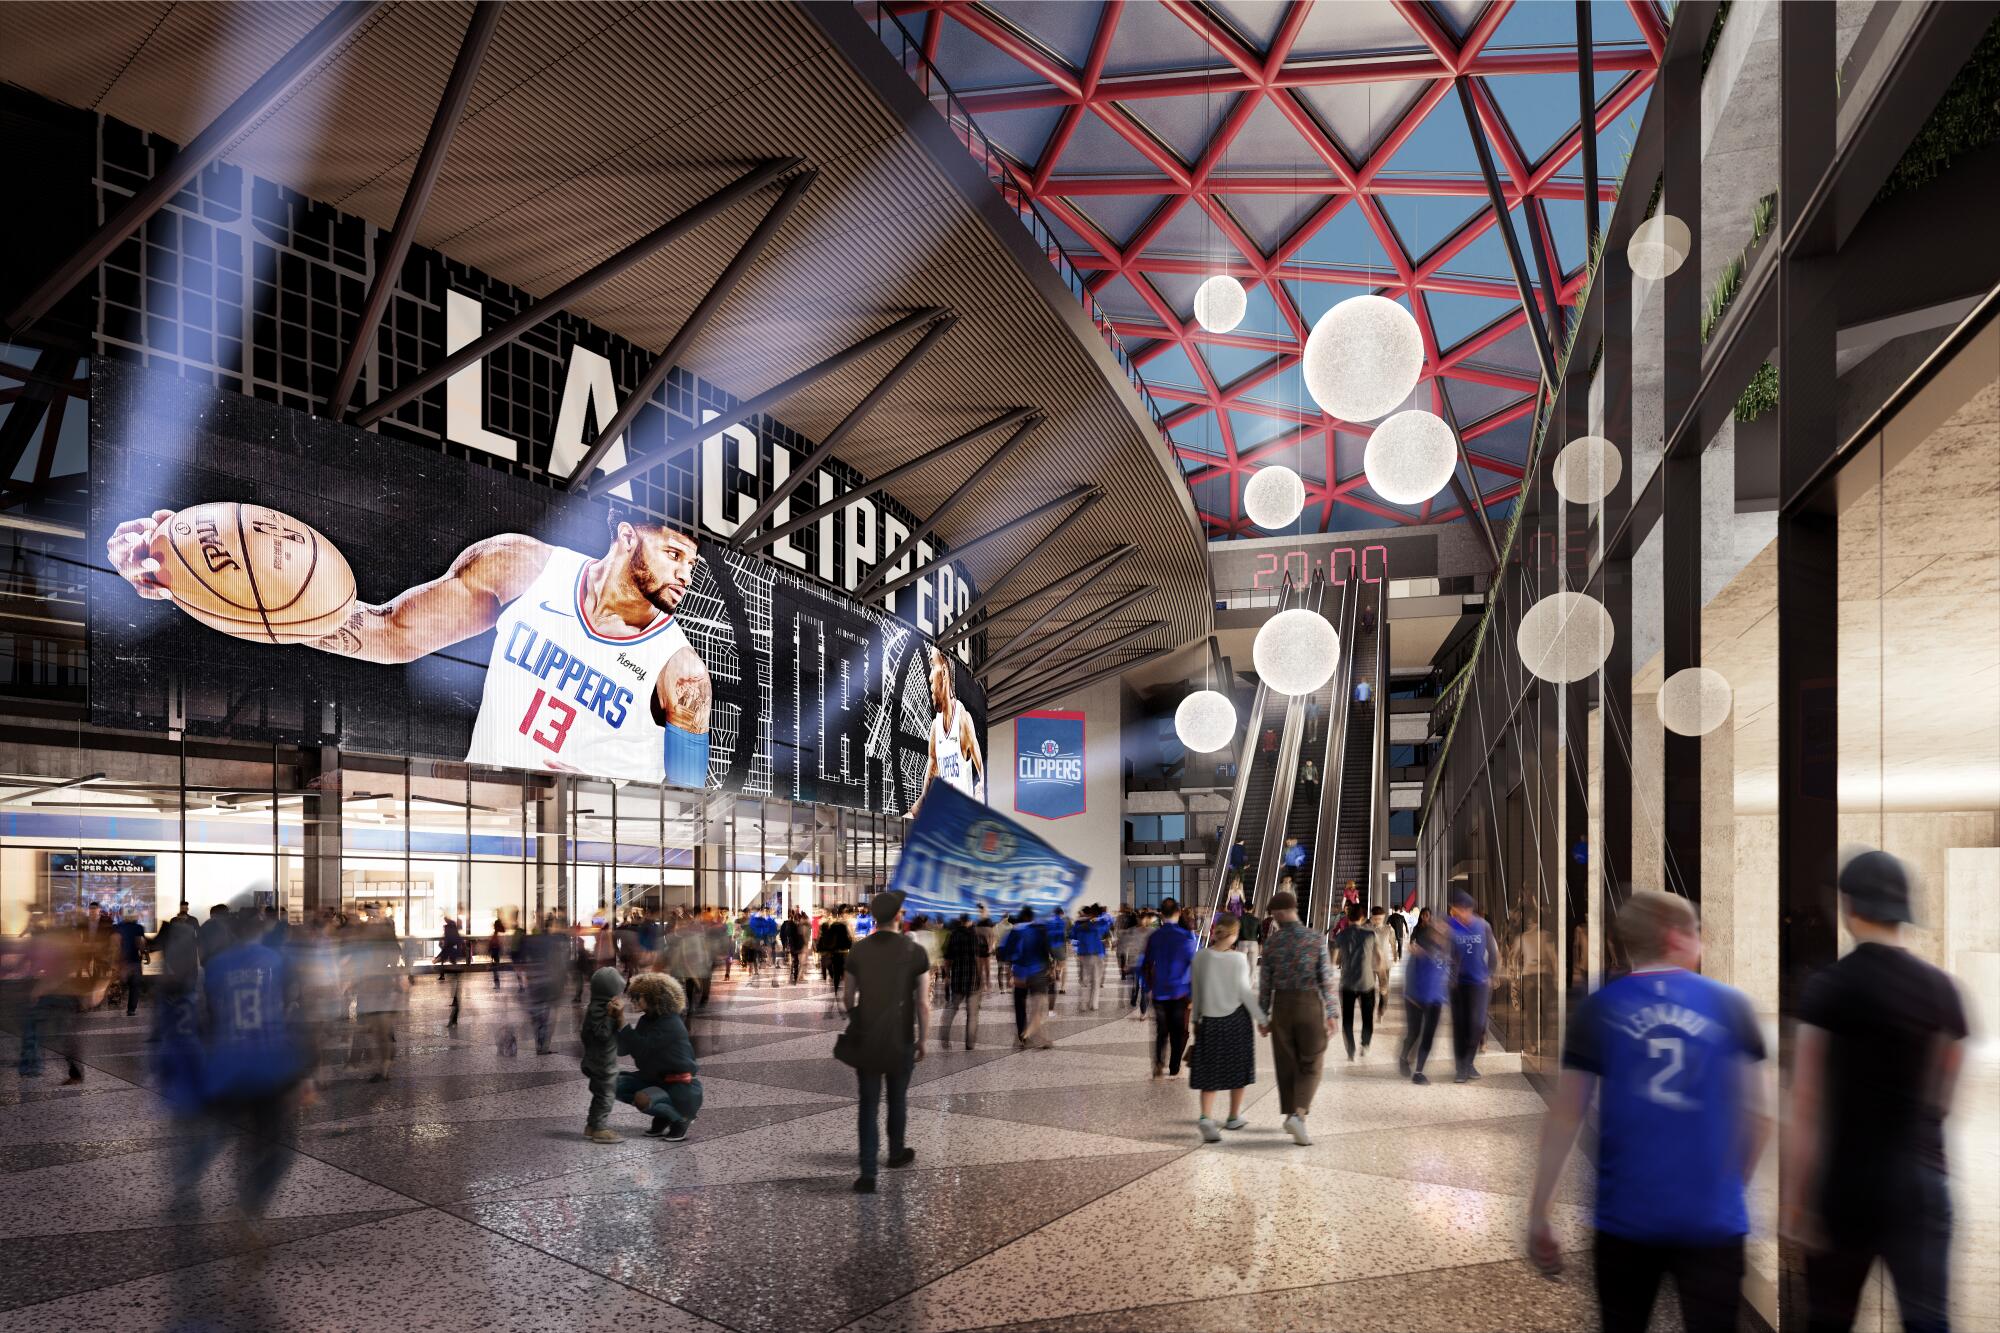 An artist's rendering shows fans strolling a wide concourse inside the Clippers' new arena, The Intuit Dome.